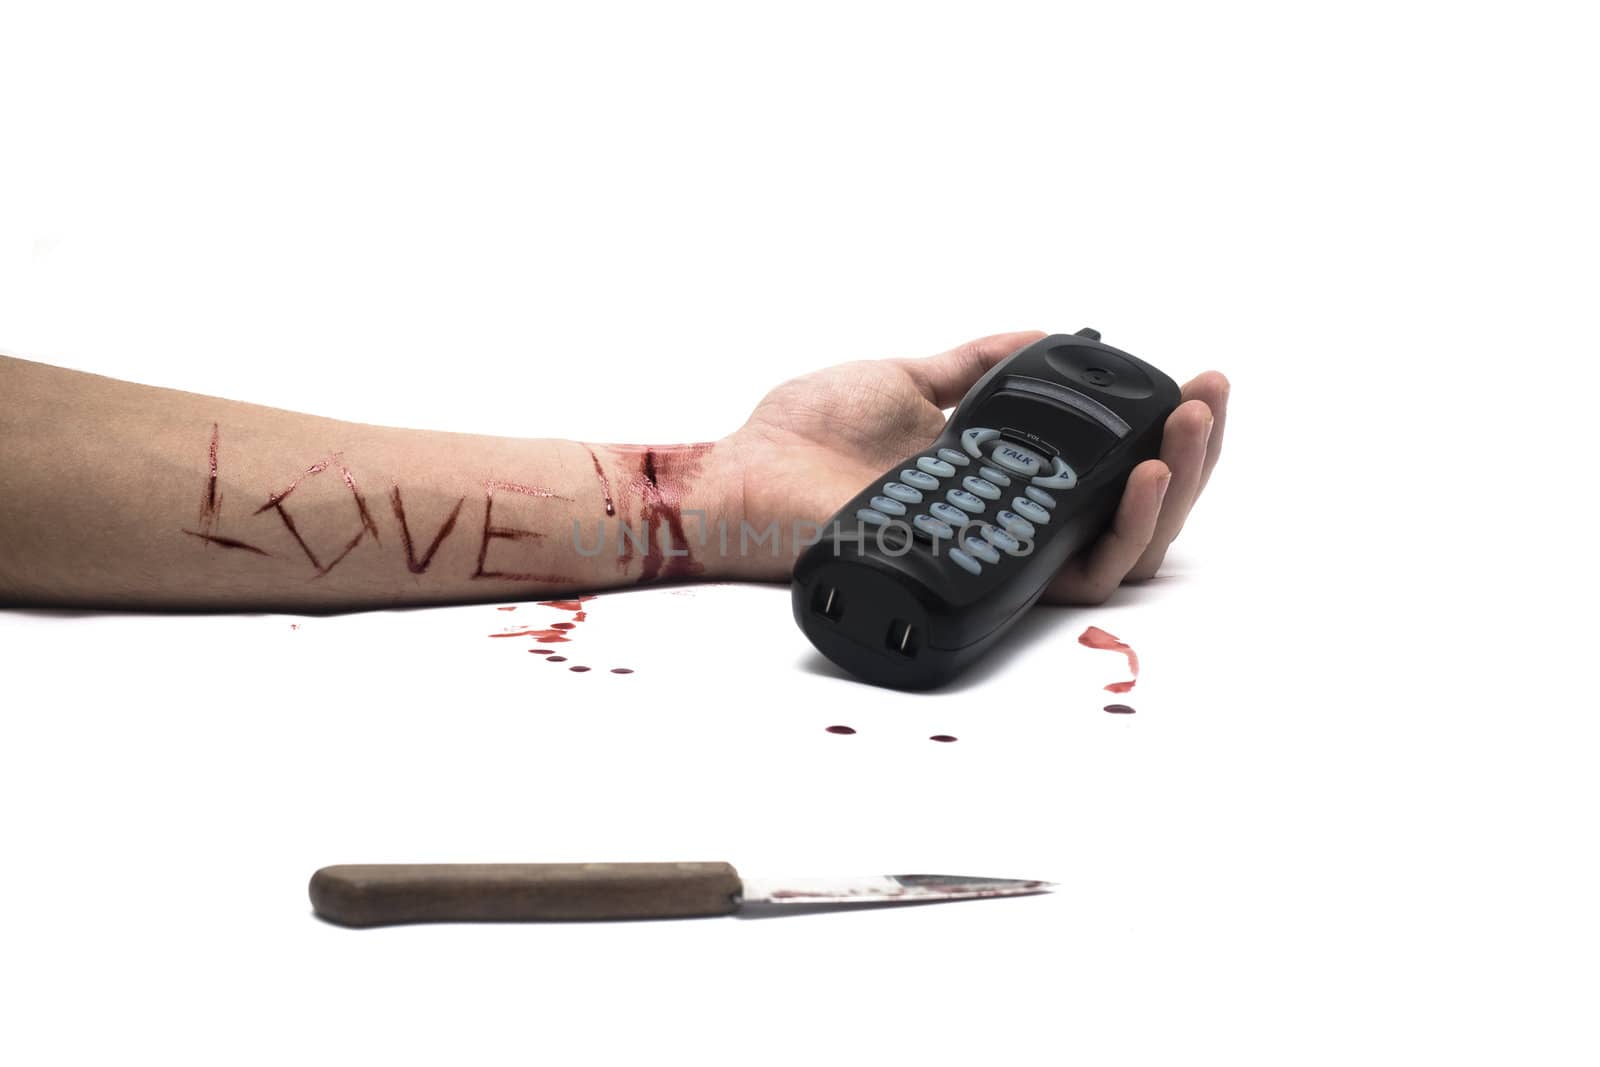 A bloody knife and a cut wrist, isolated on white with a telephone and LOVE cut across the arm. This image has innumerous uses like accidents, domestic violence, suicide, murder, hate, etc...
